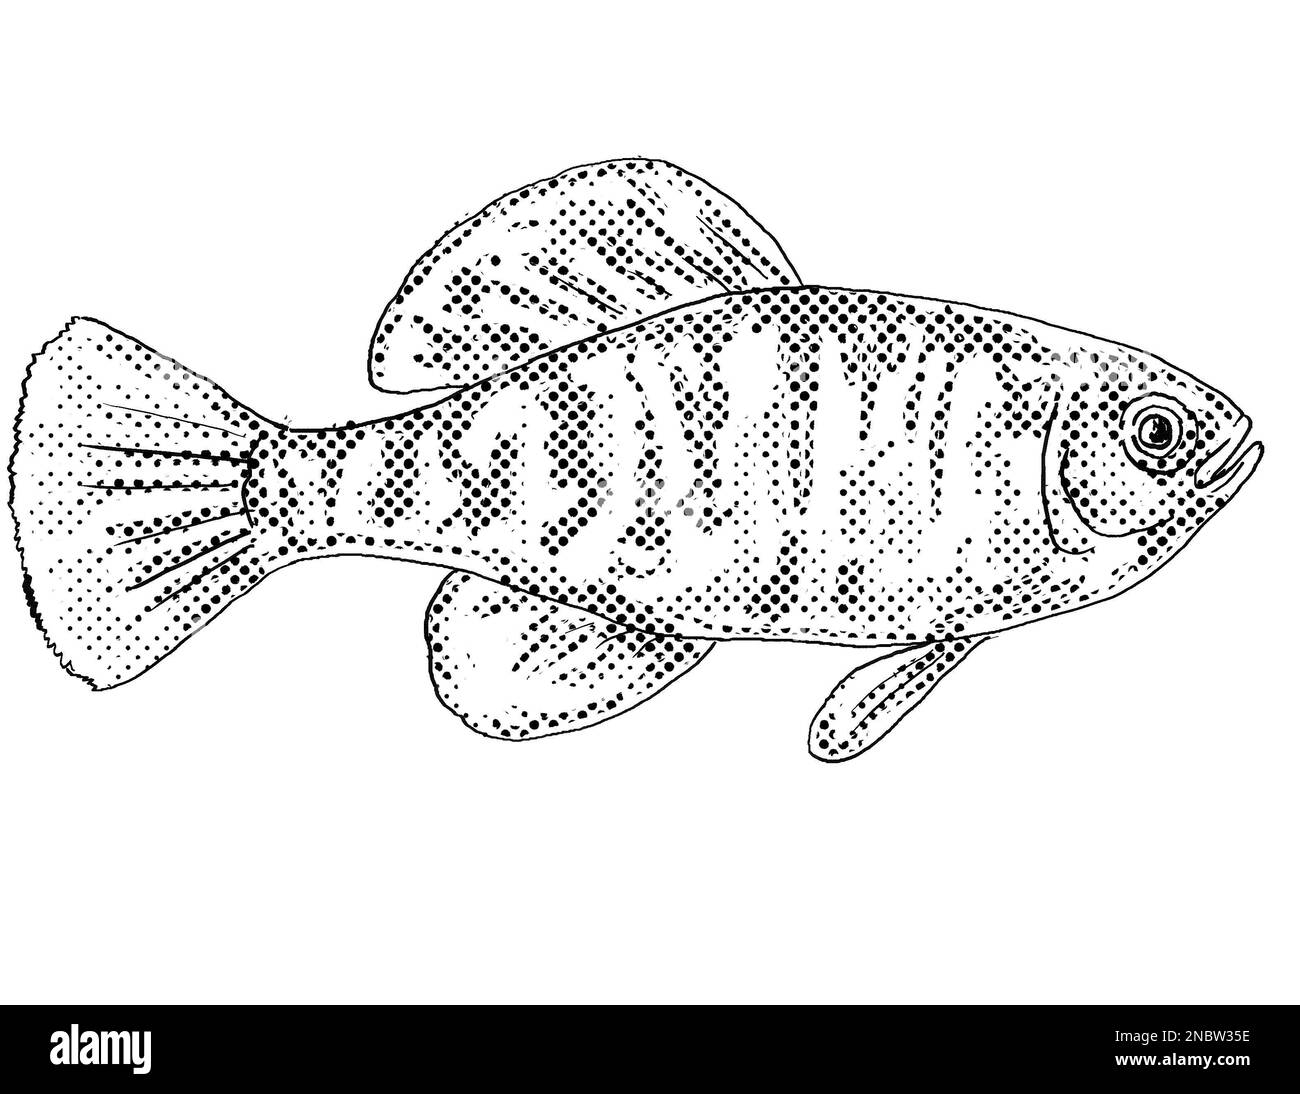 Cartoon style line drawing of a Gulf Coast pygmy sunfish or Elassoma  gilberti, a freshwater fish endemic to North America with halftone dots  shading Stock Photo - Alamy